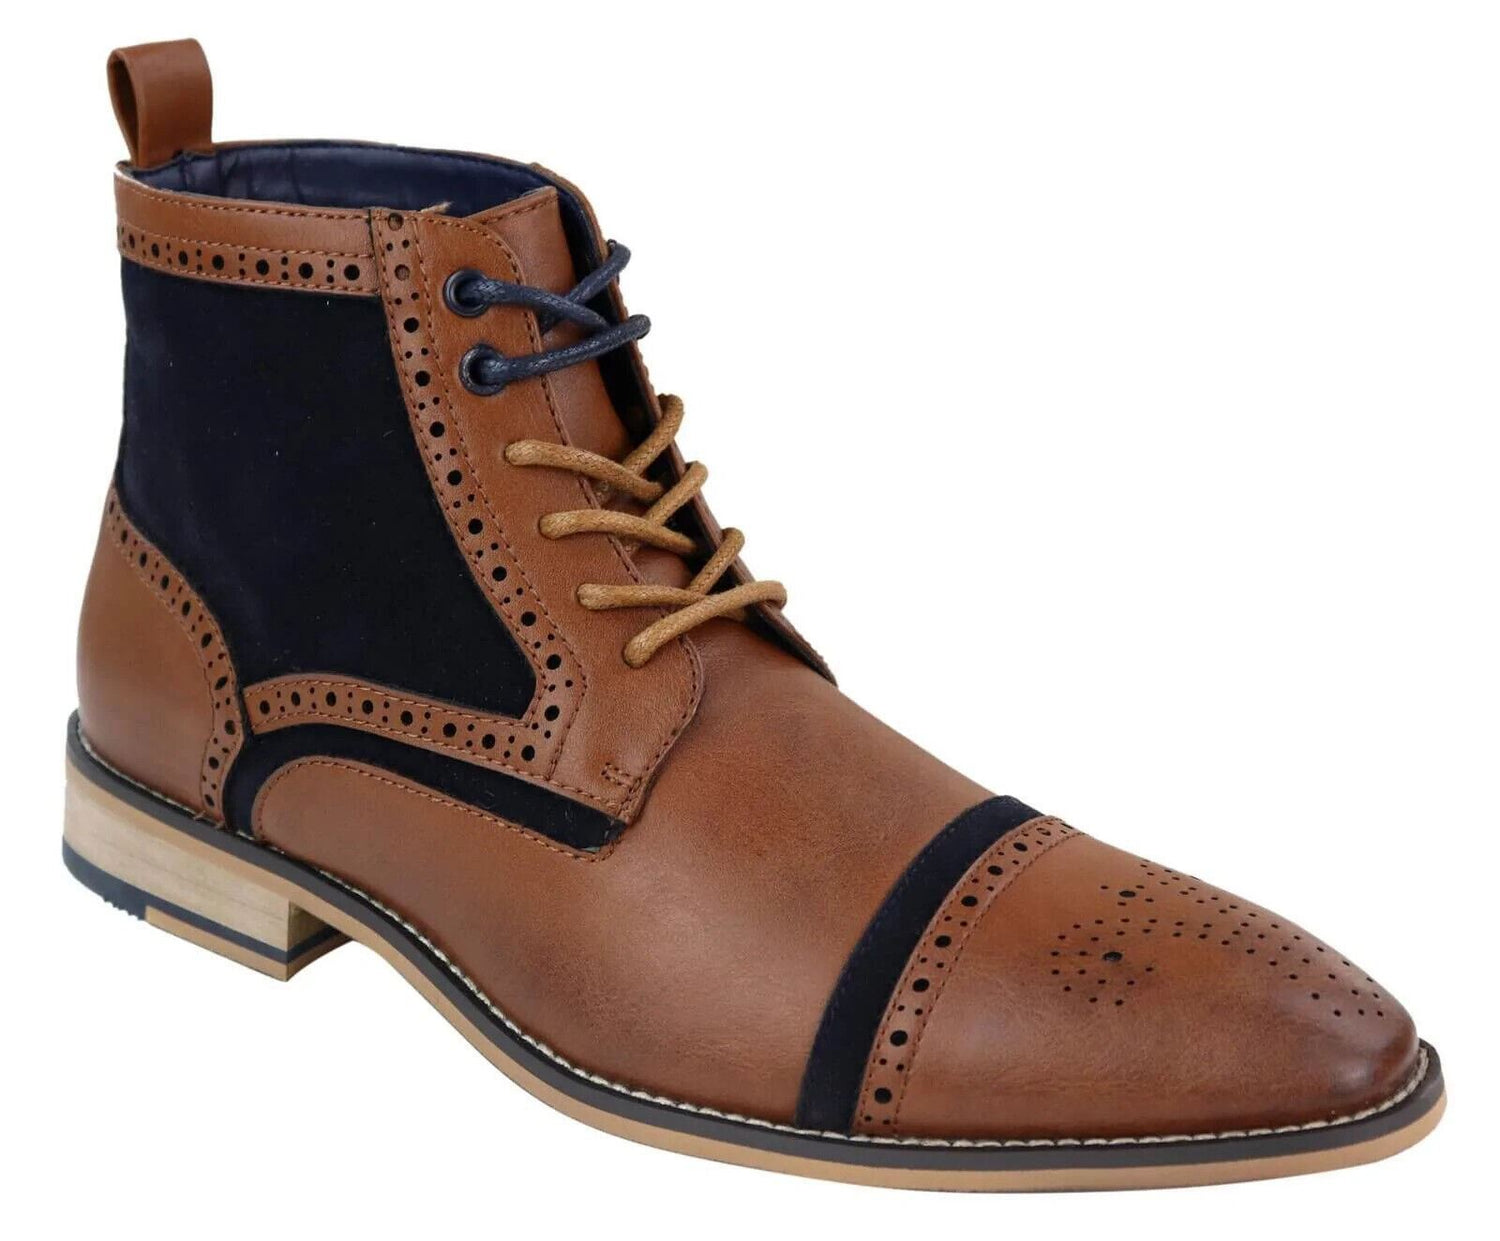 Mens Retro Oxford Brogue Ankle Boots in Tan/Navy Leather